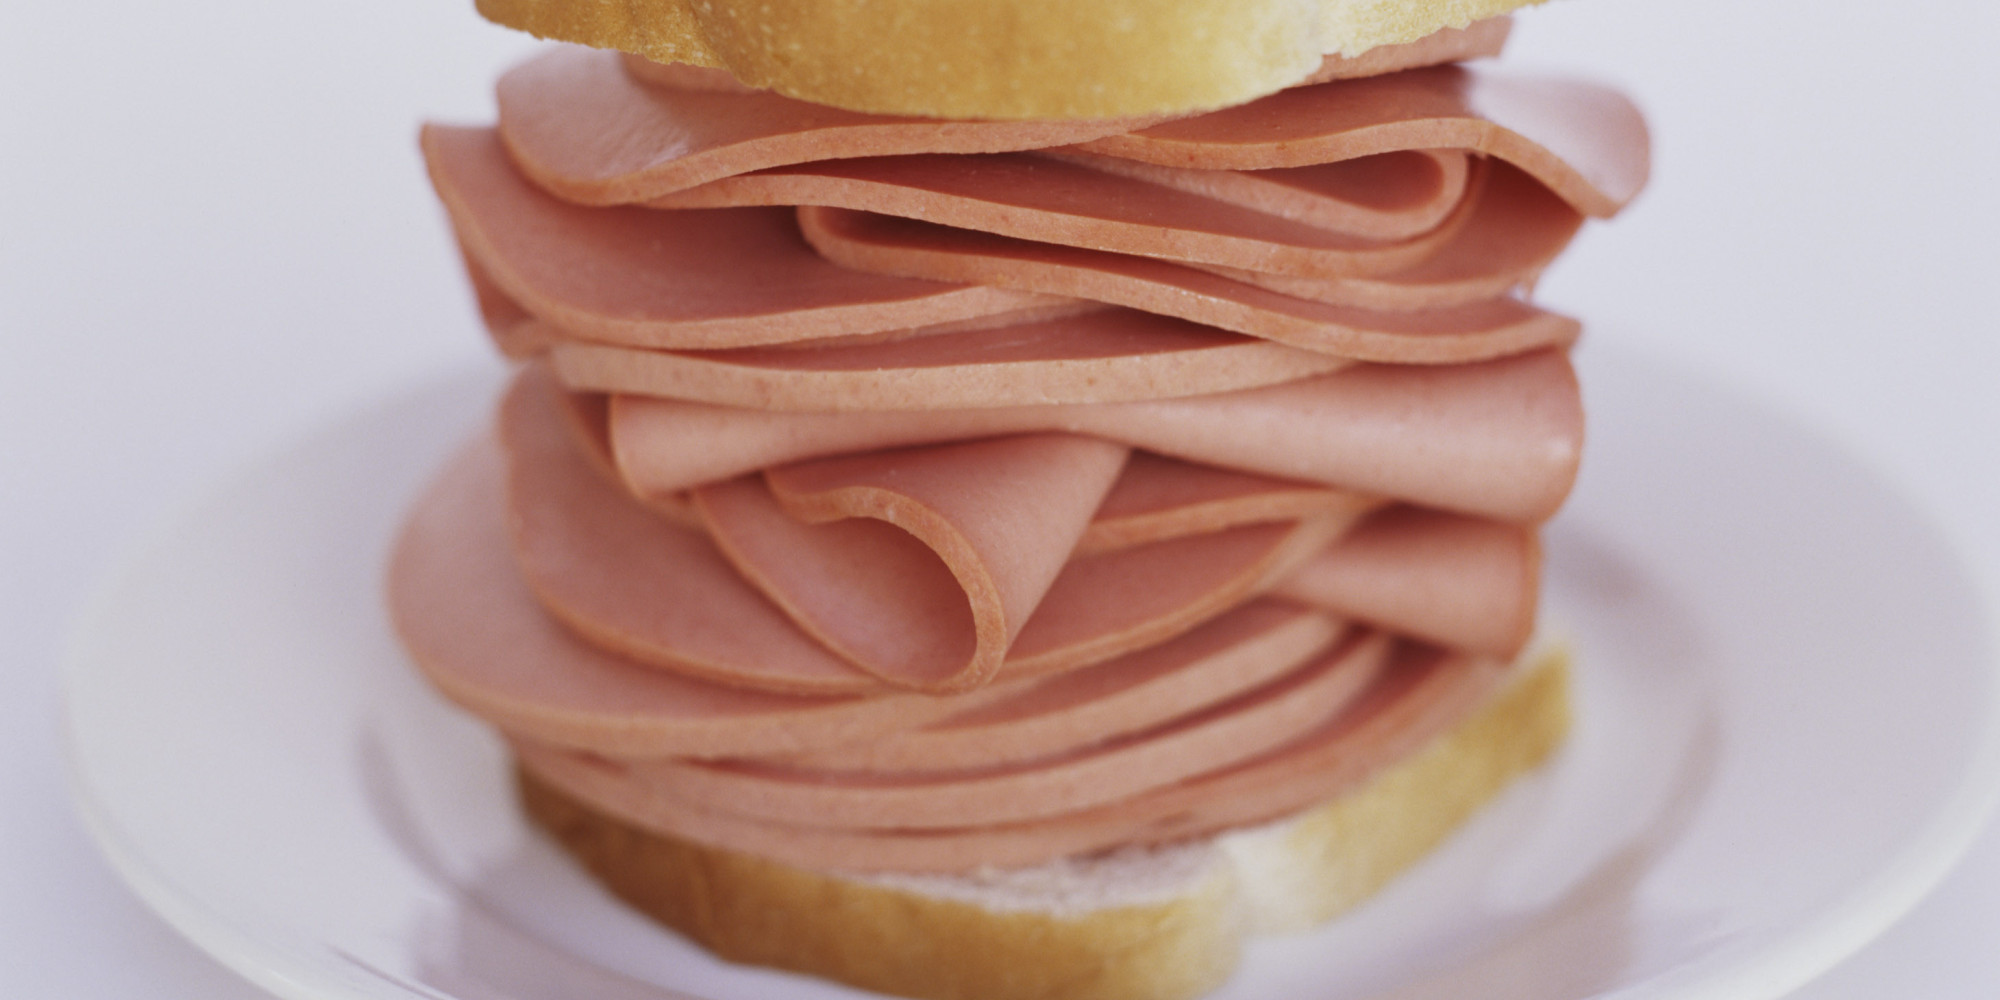 What The Heck Is In Bologna, Anyway? HuffPost